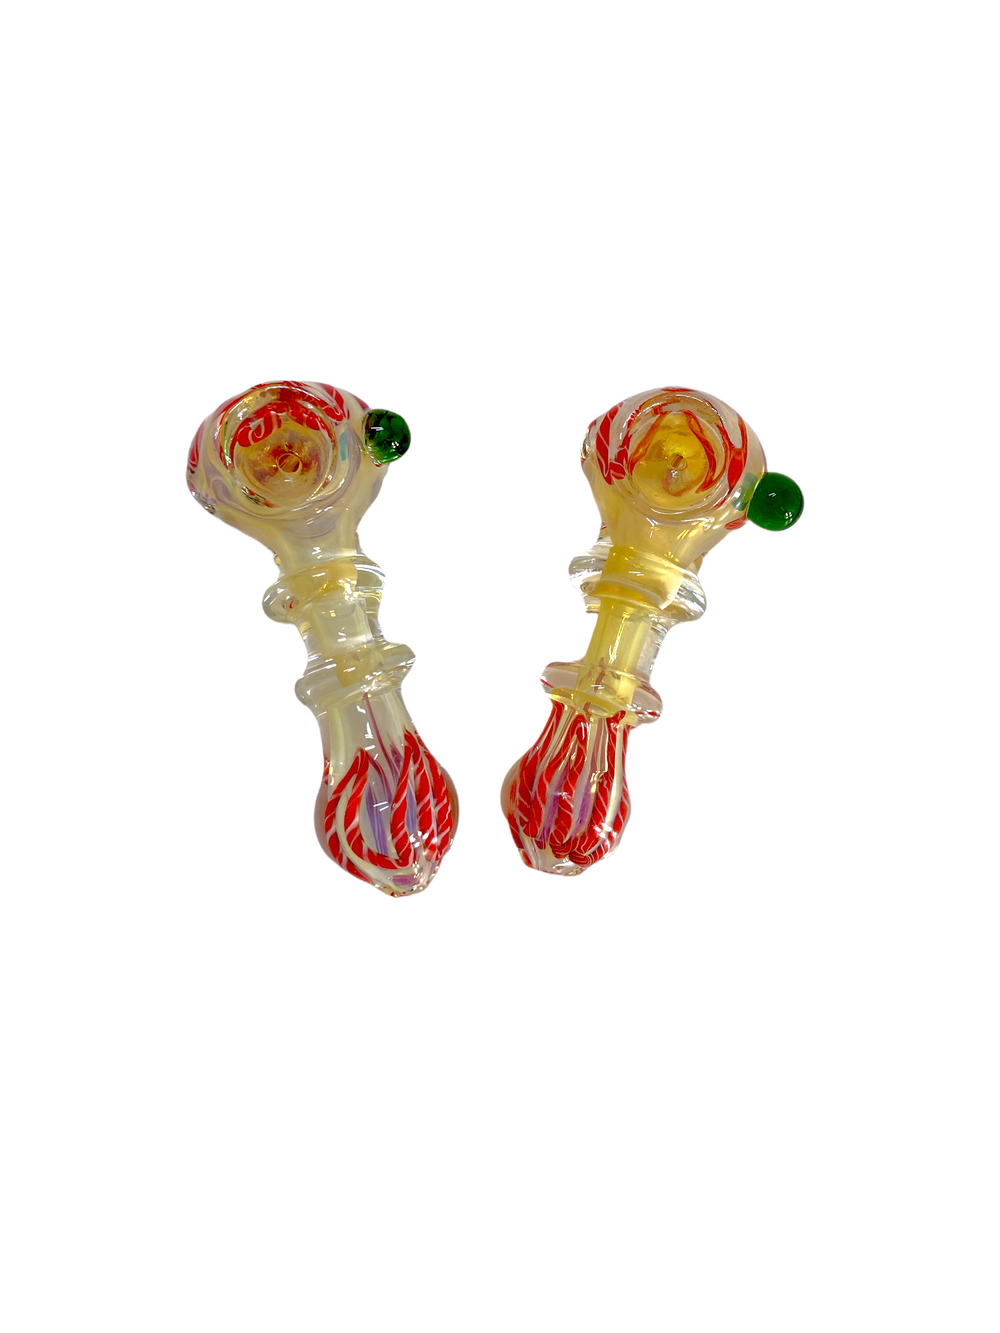 3.5" Double Ring Fumed Rasta Striped Glass Hand Pipe